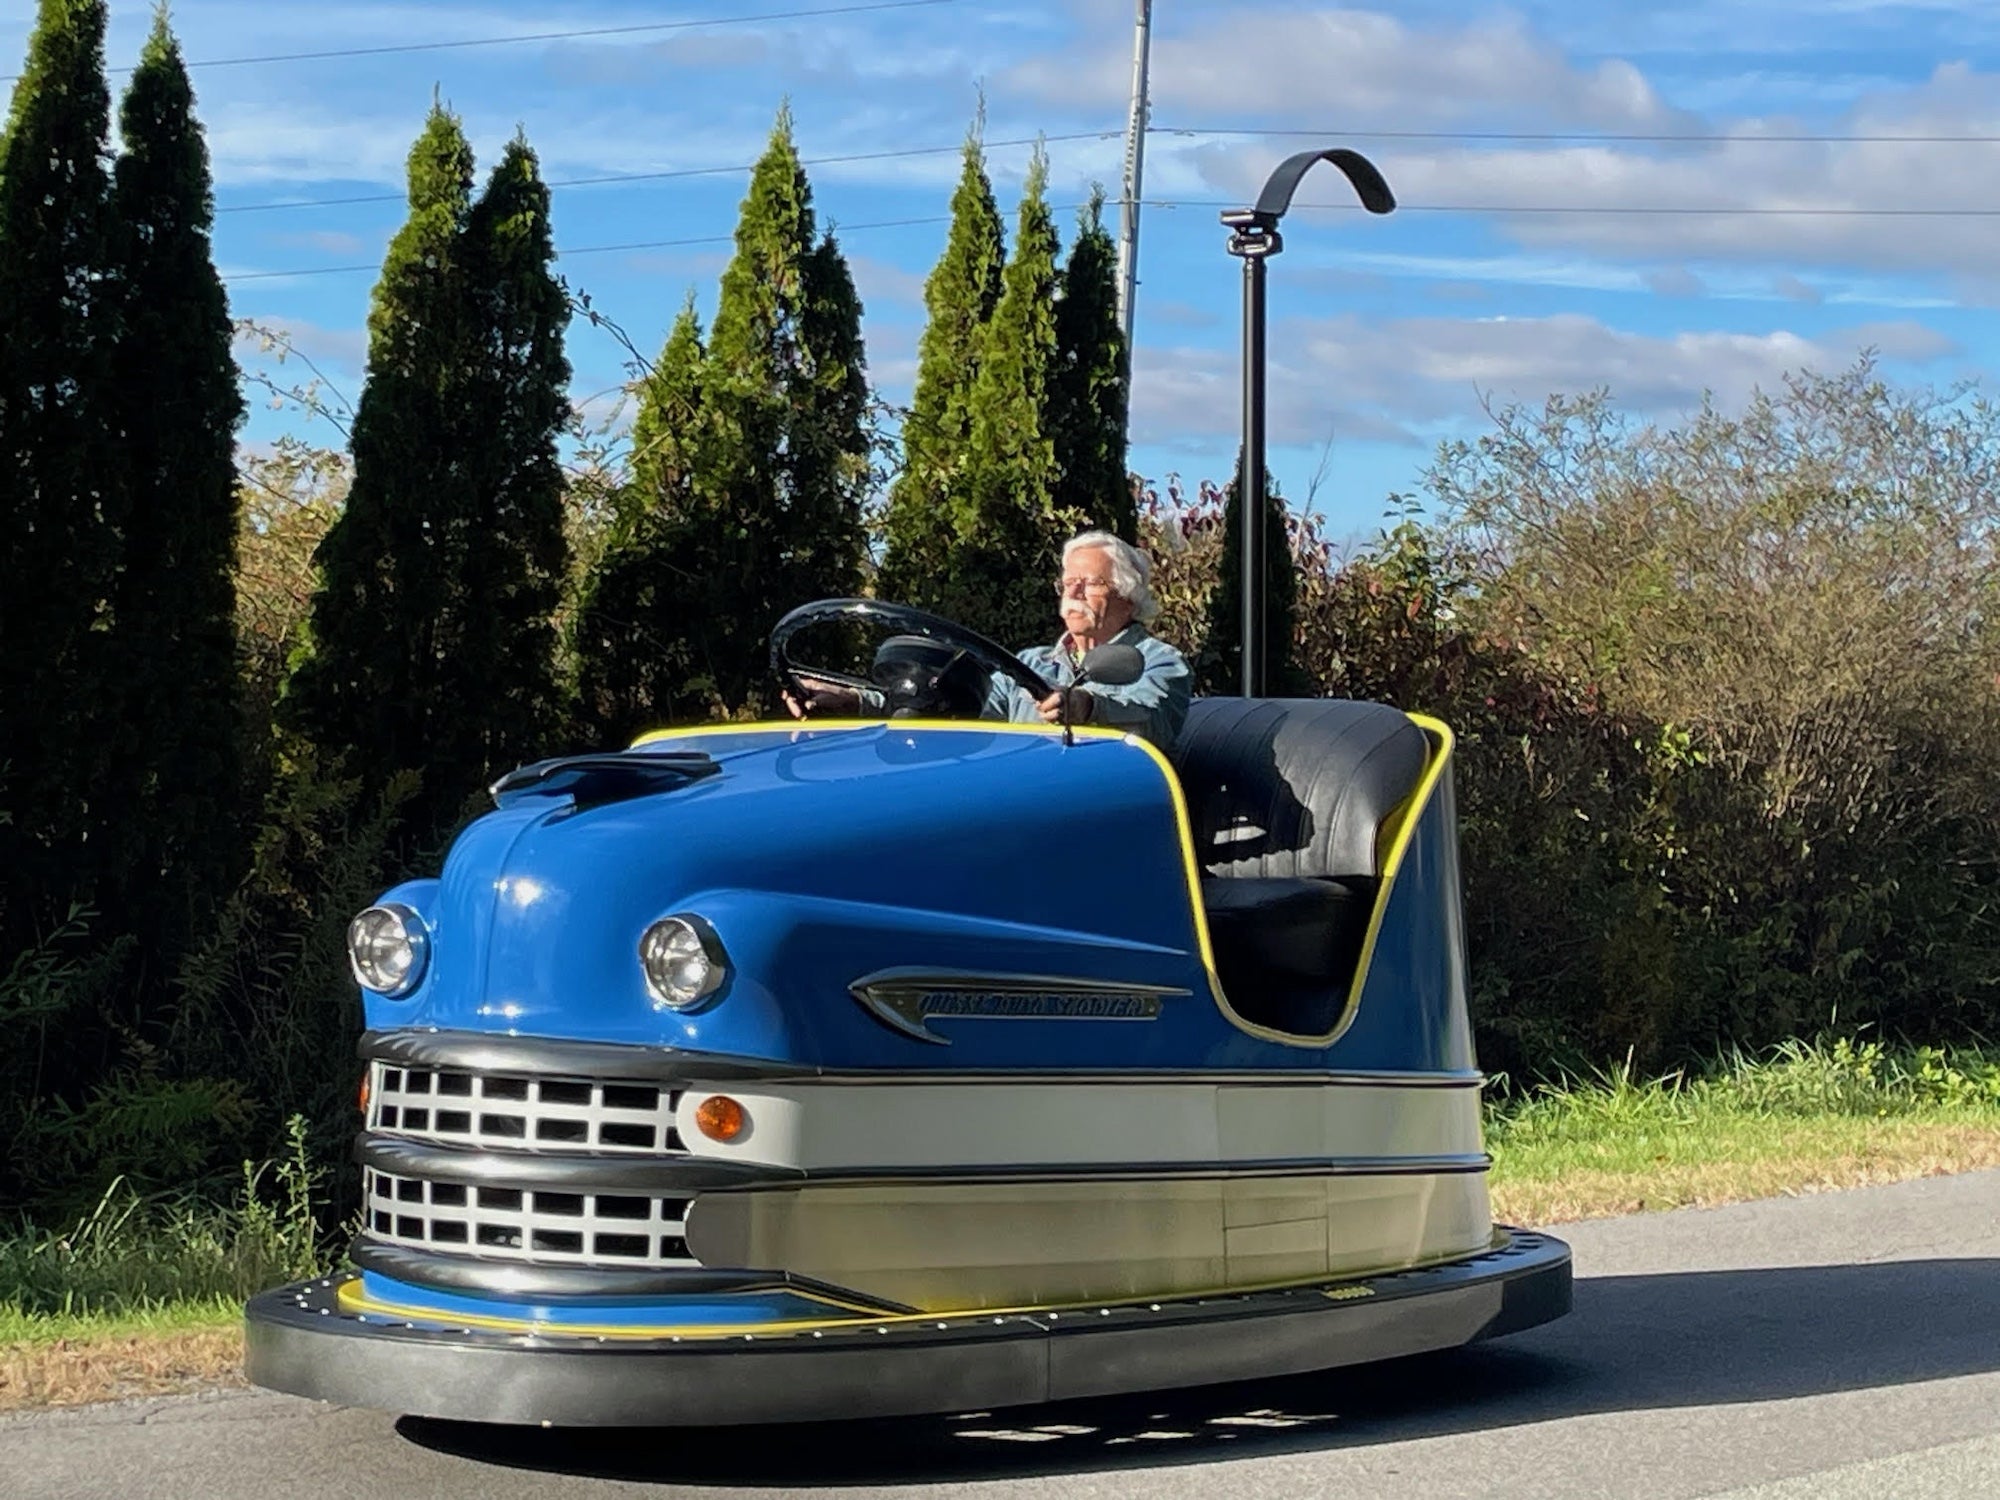 a giant bumper car on the road